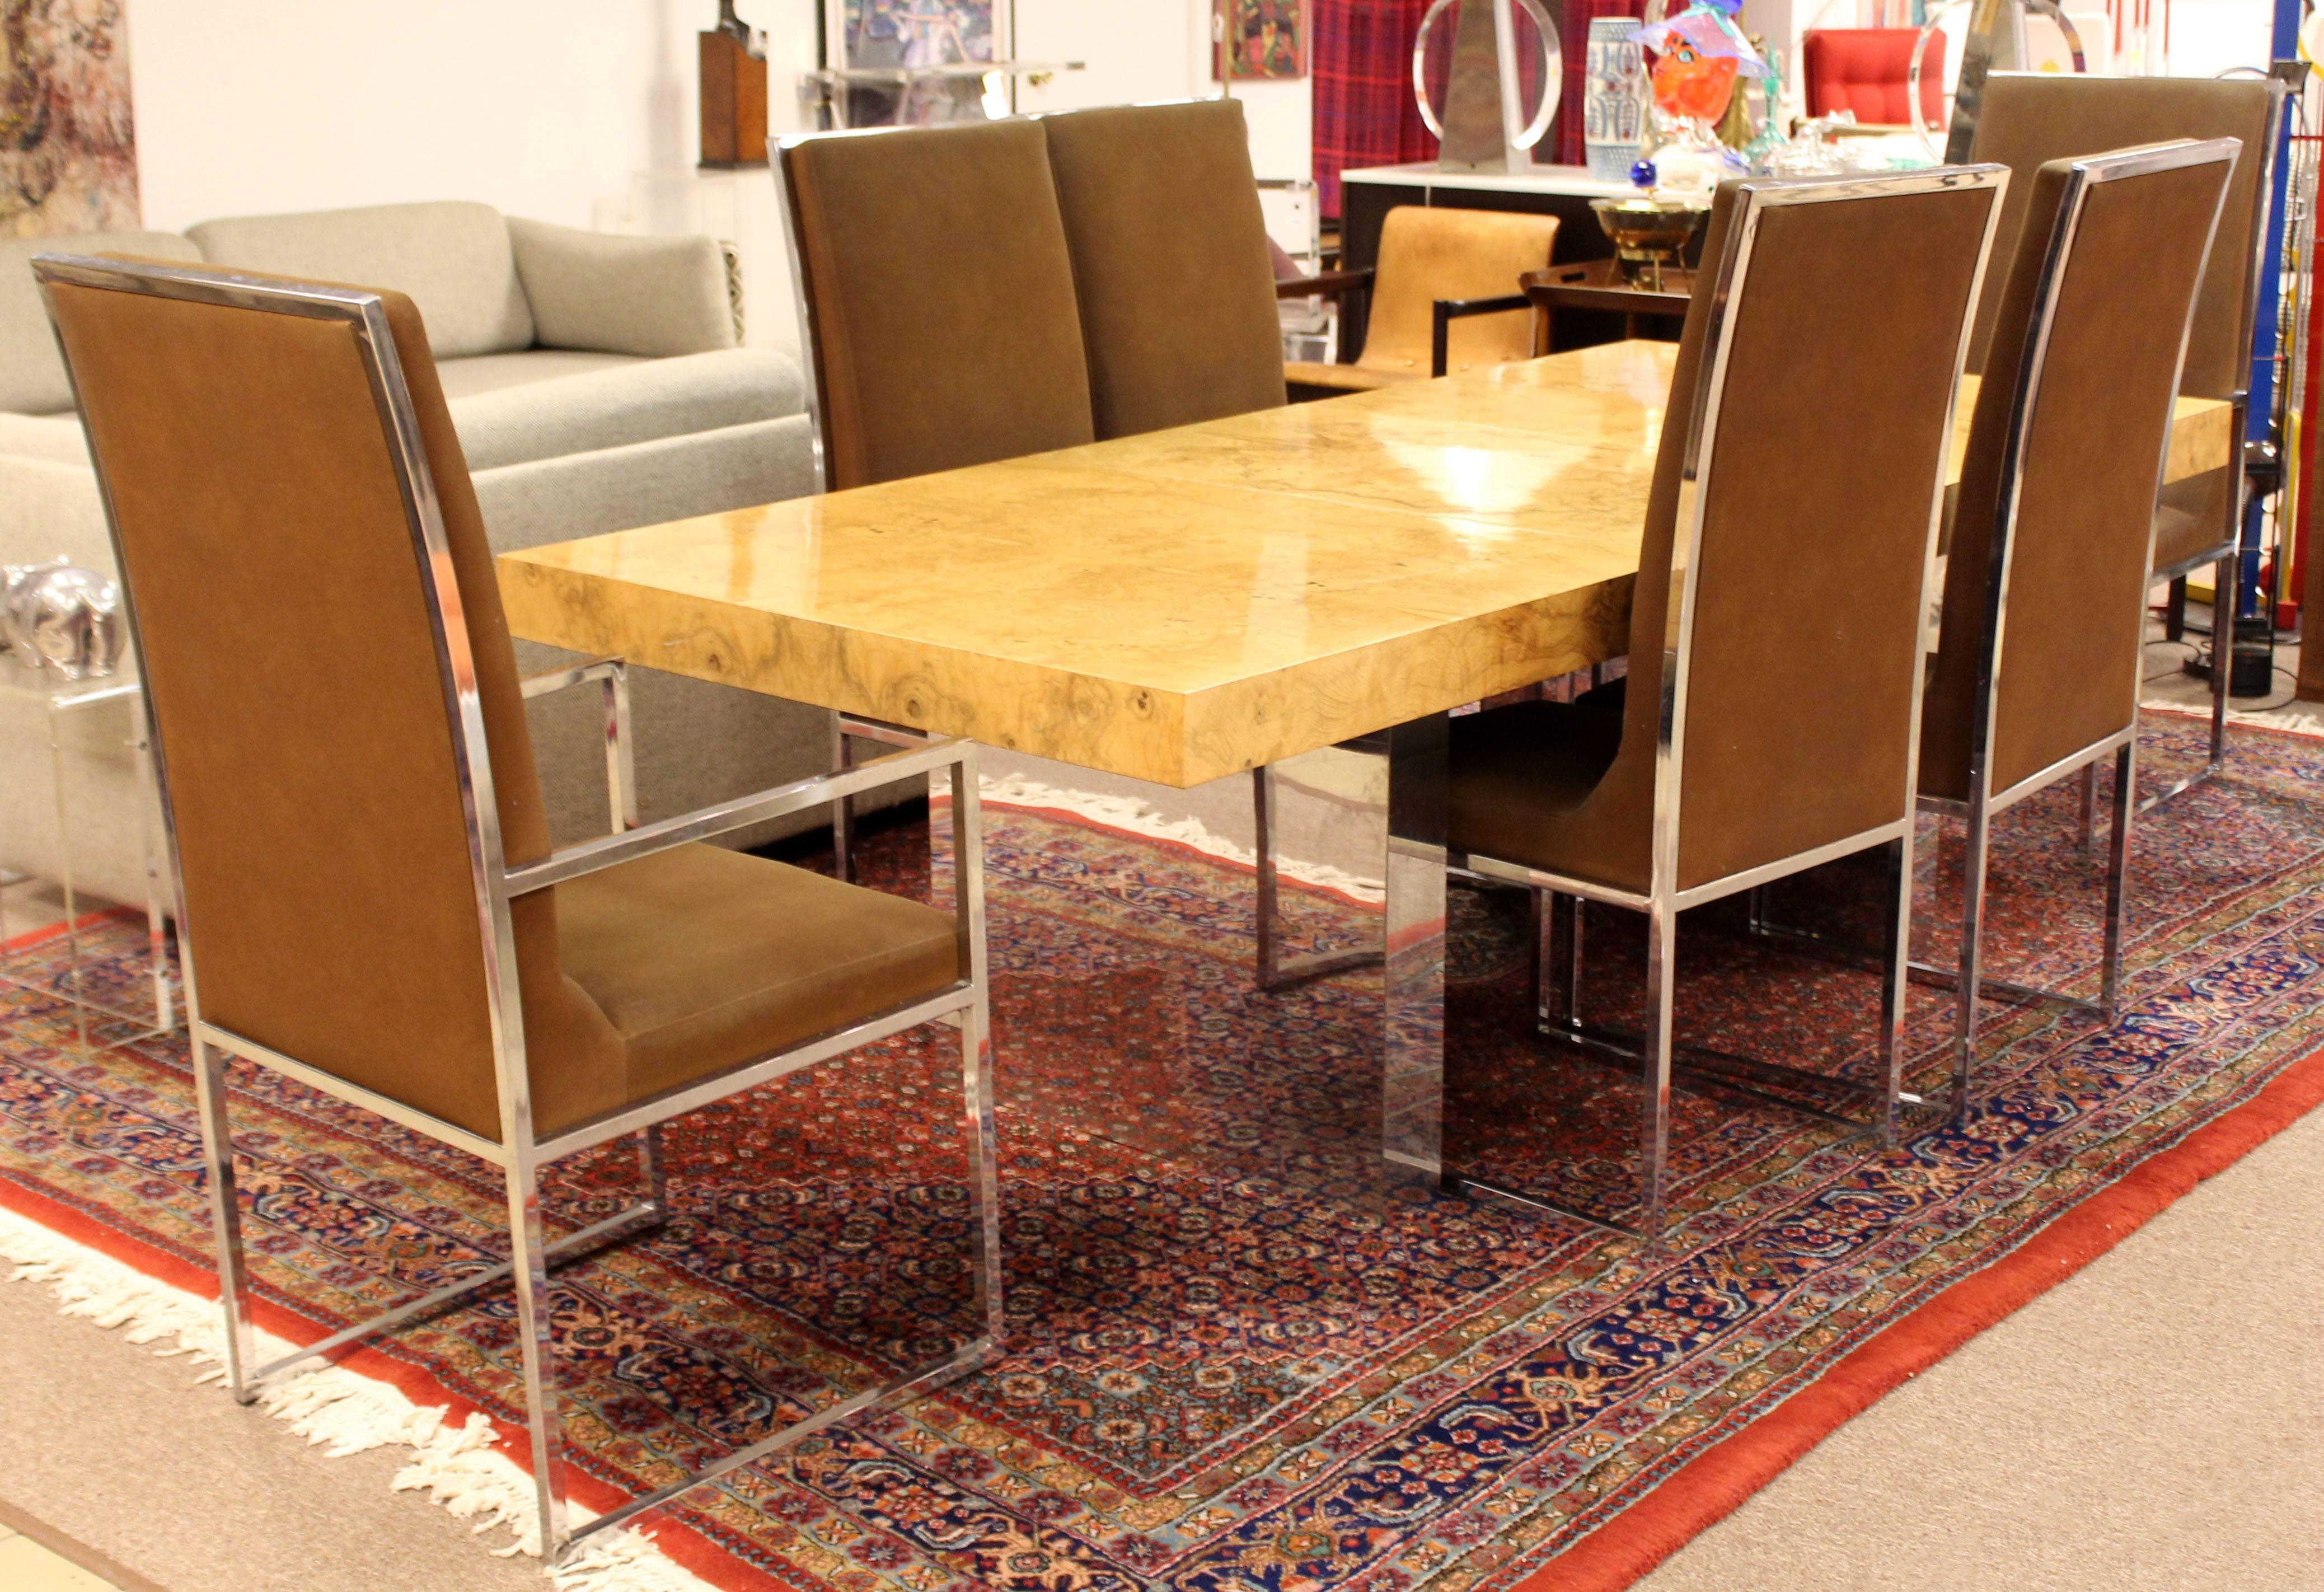 For your consideration is a phenomenal, burl wood dining table, on chrome legs, designed by Milo Baughman, circa the 1970s. Includes two leaves. In very good condition. The dimensions are: With both leafs 110", with no leafs: 66" W x